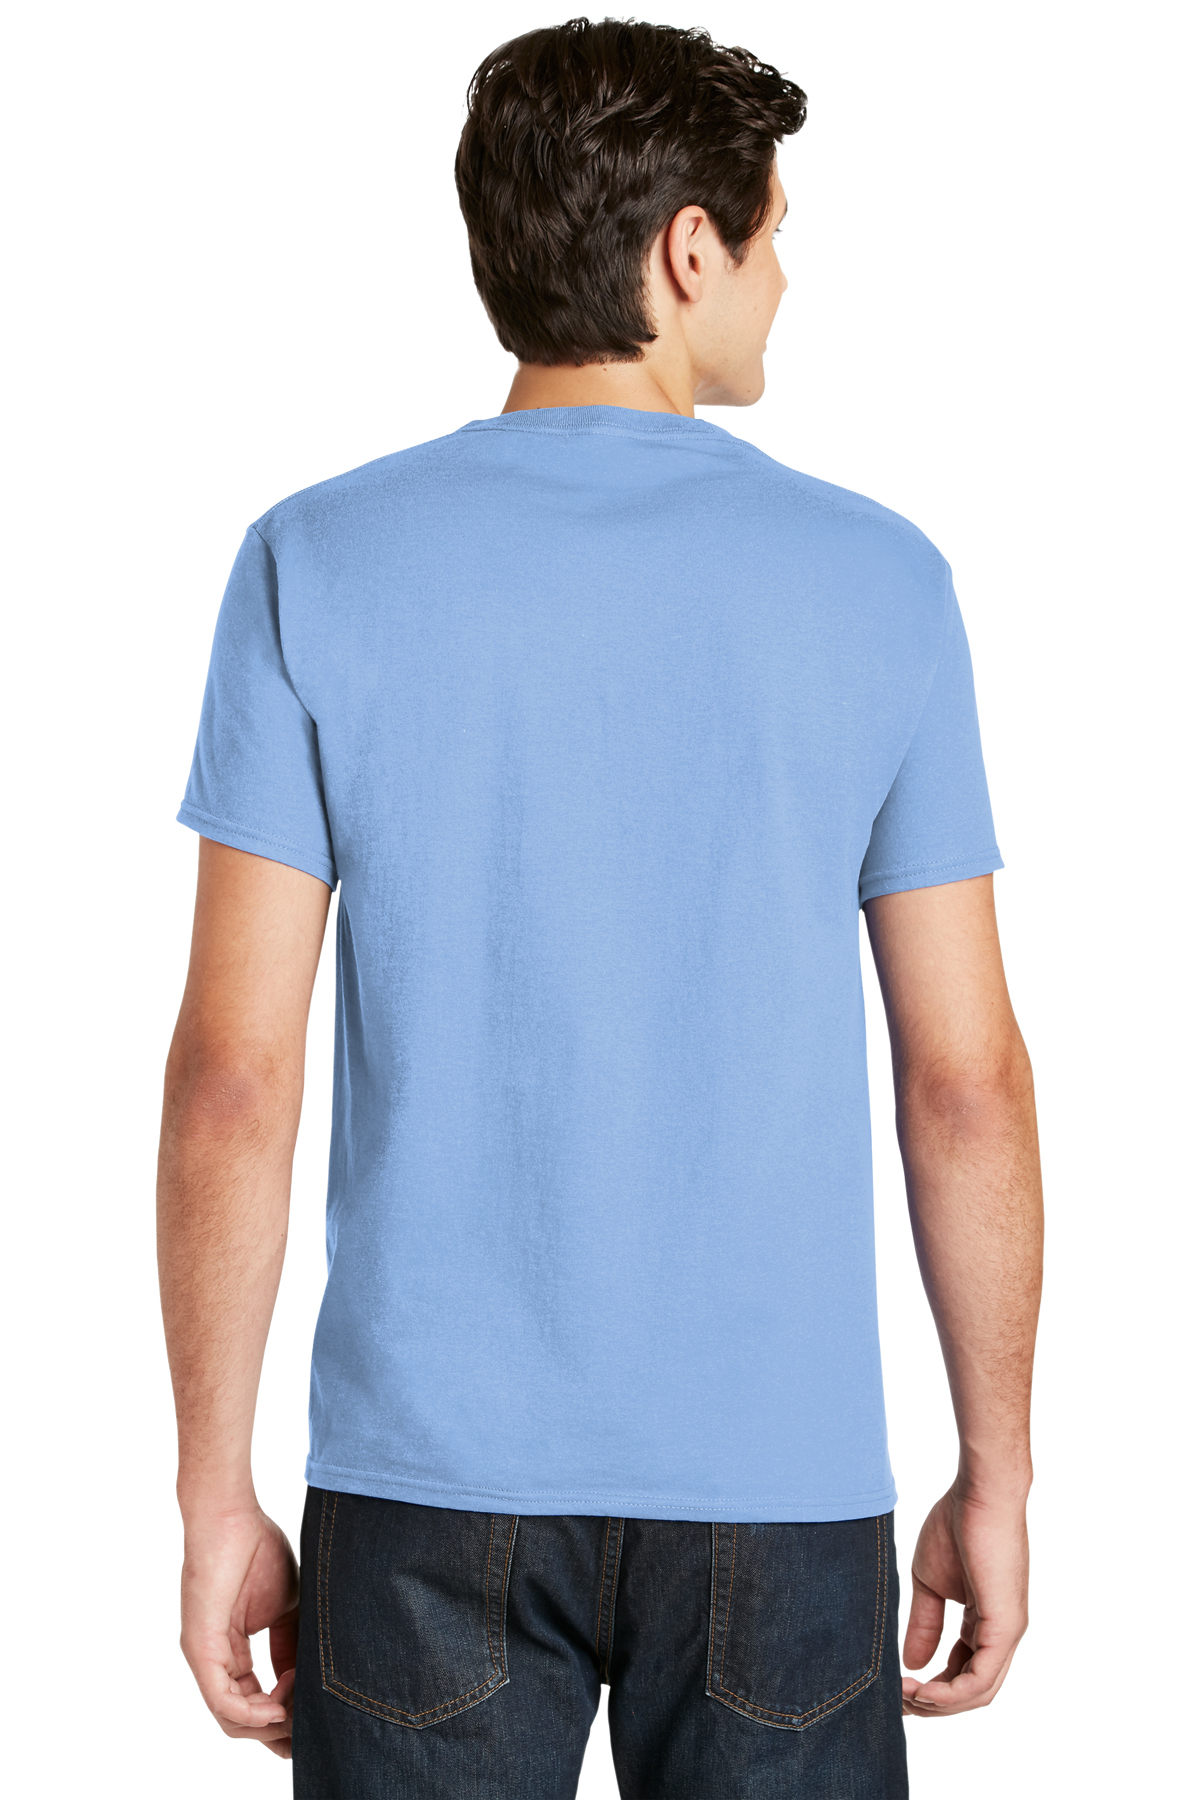 5280 Hanes® ComfortSoft® 100% Cotton T-Shirt - Hit Promotional Products